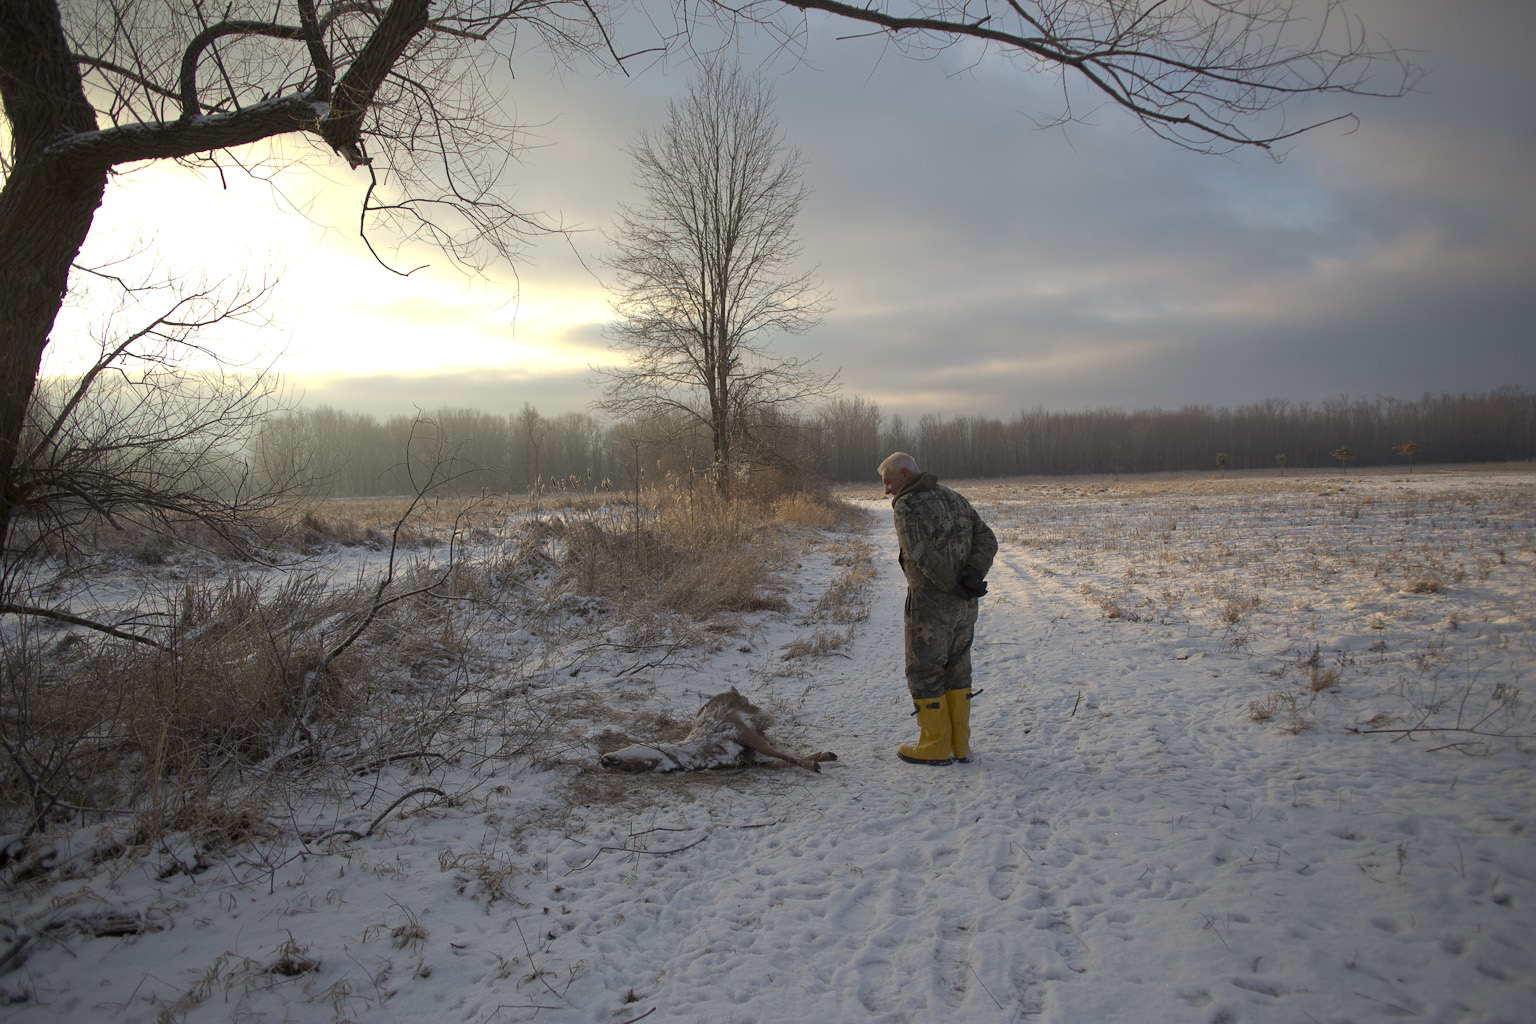 (Name withheld) surveys a deer carcass in a West Henrietta field after it was ravaged by coyotes on January 27, 2013.